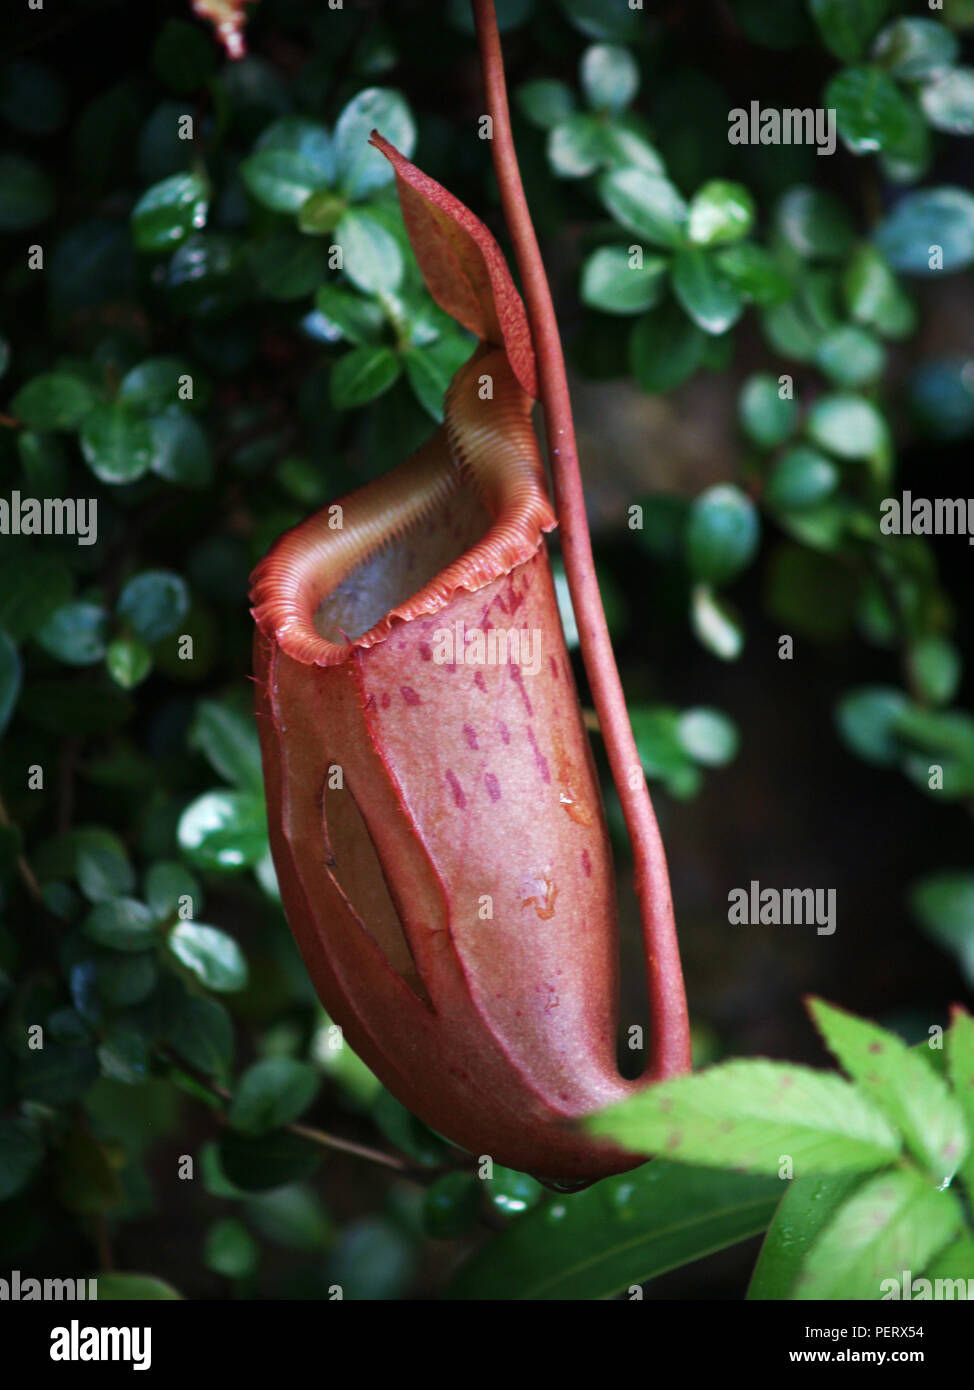 Cup of pitcher plant prepare to catch quarry Stock Photo